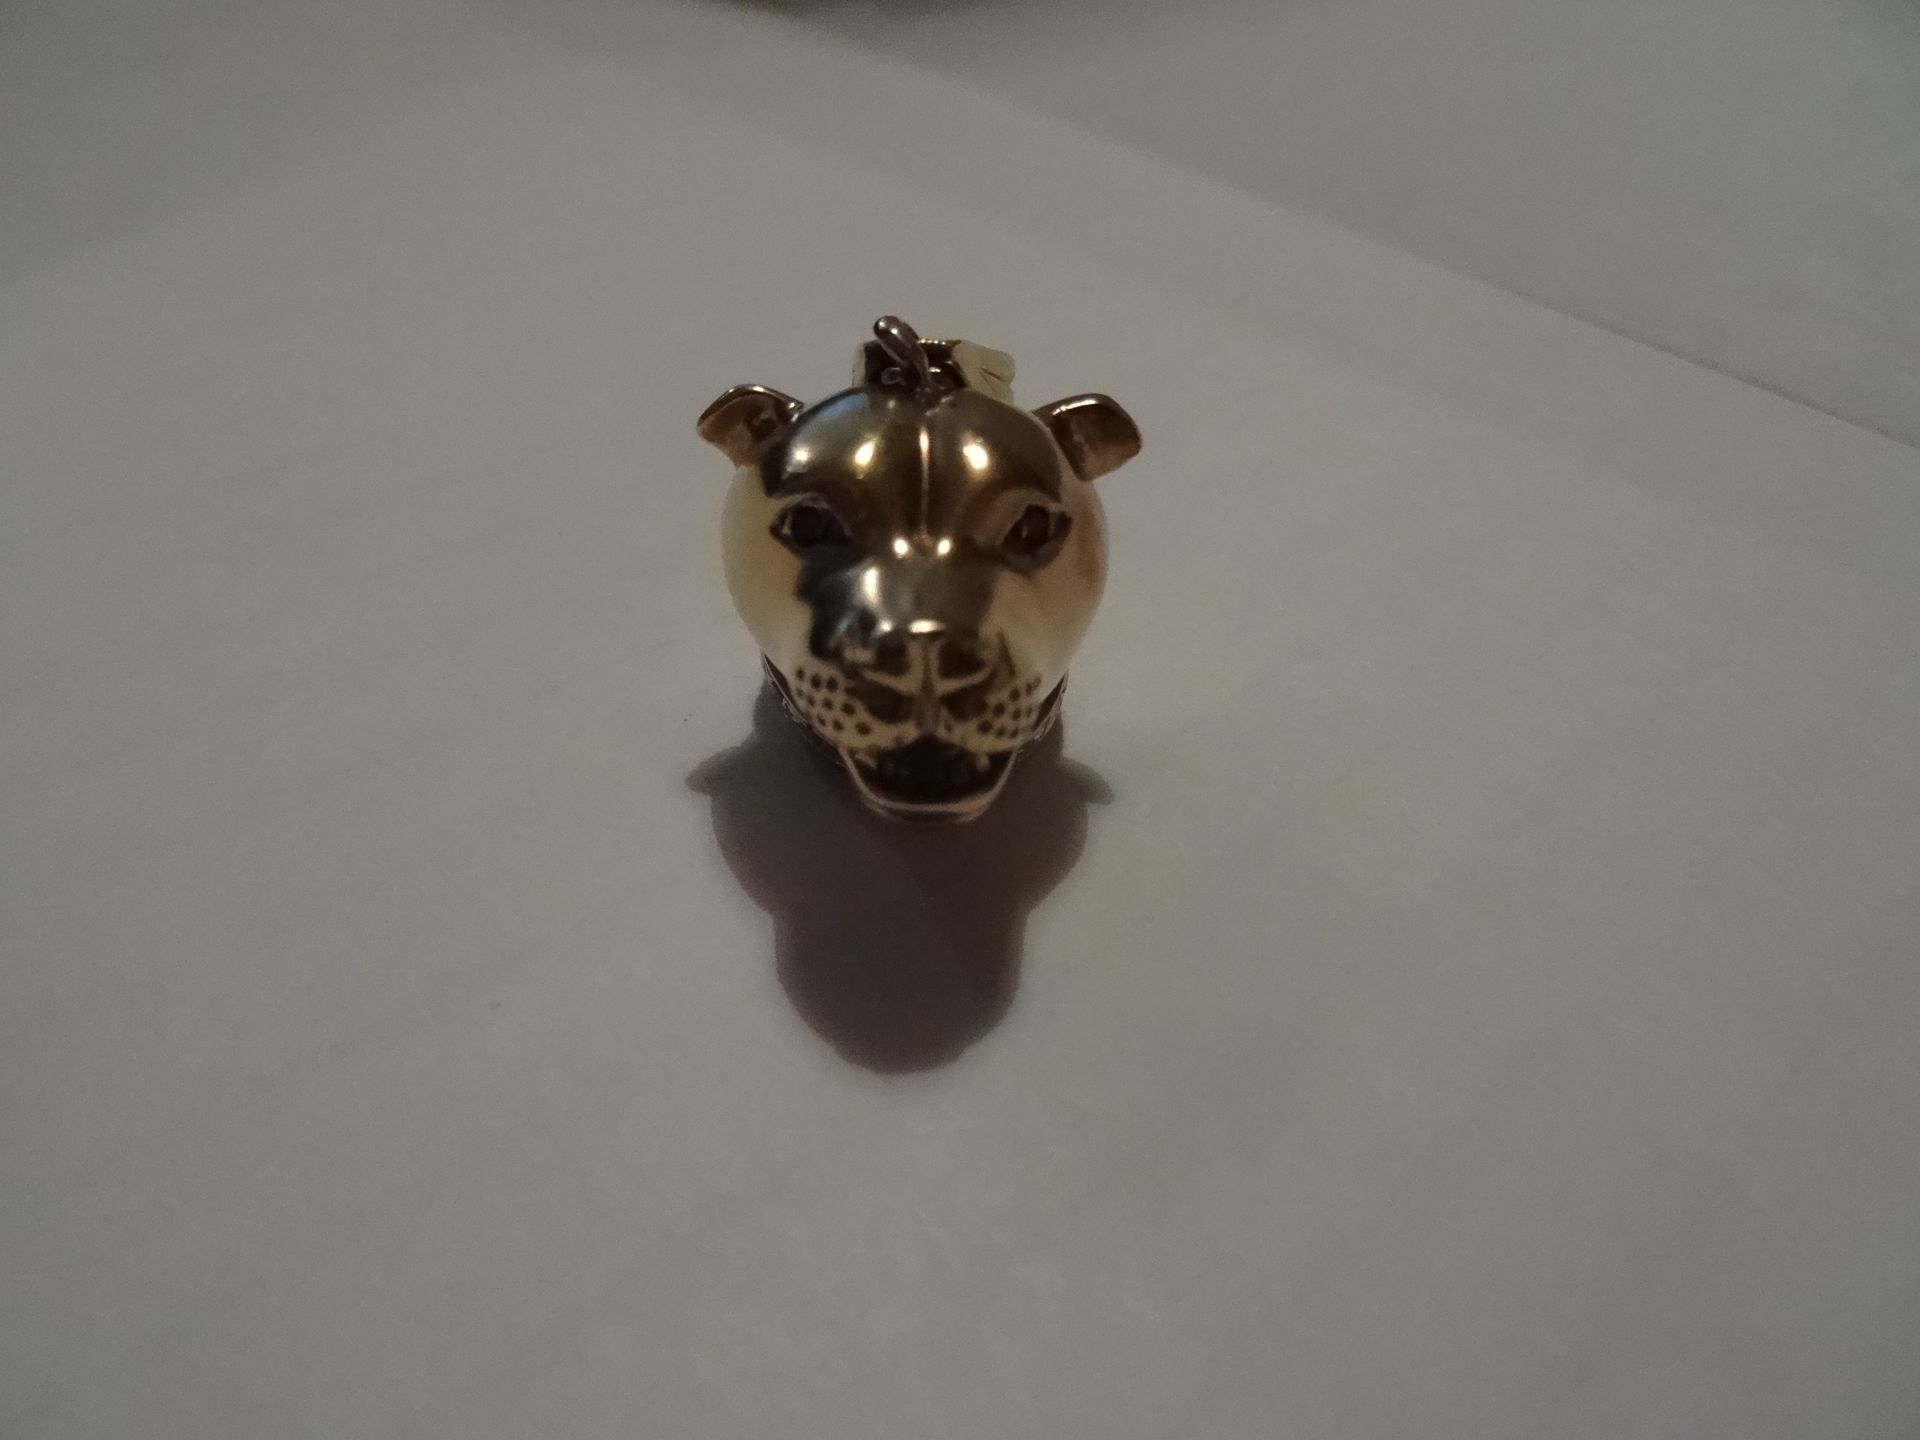 9 CARAT YELLOW GOLD, MOVeABLE DOGS HEAD PENDANT - Image 4 of 4